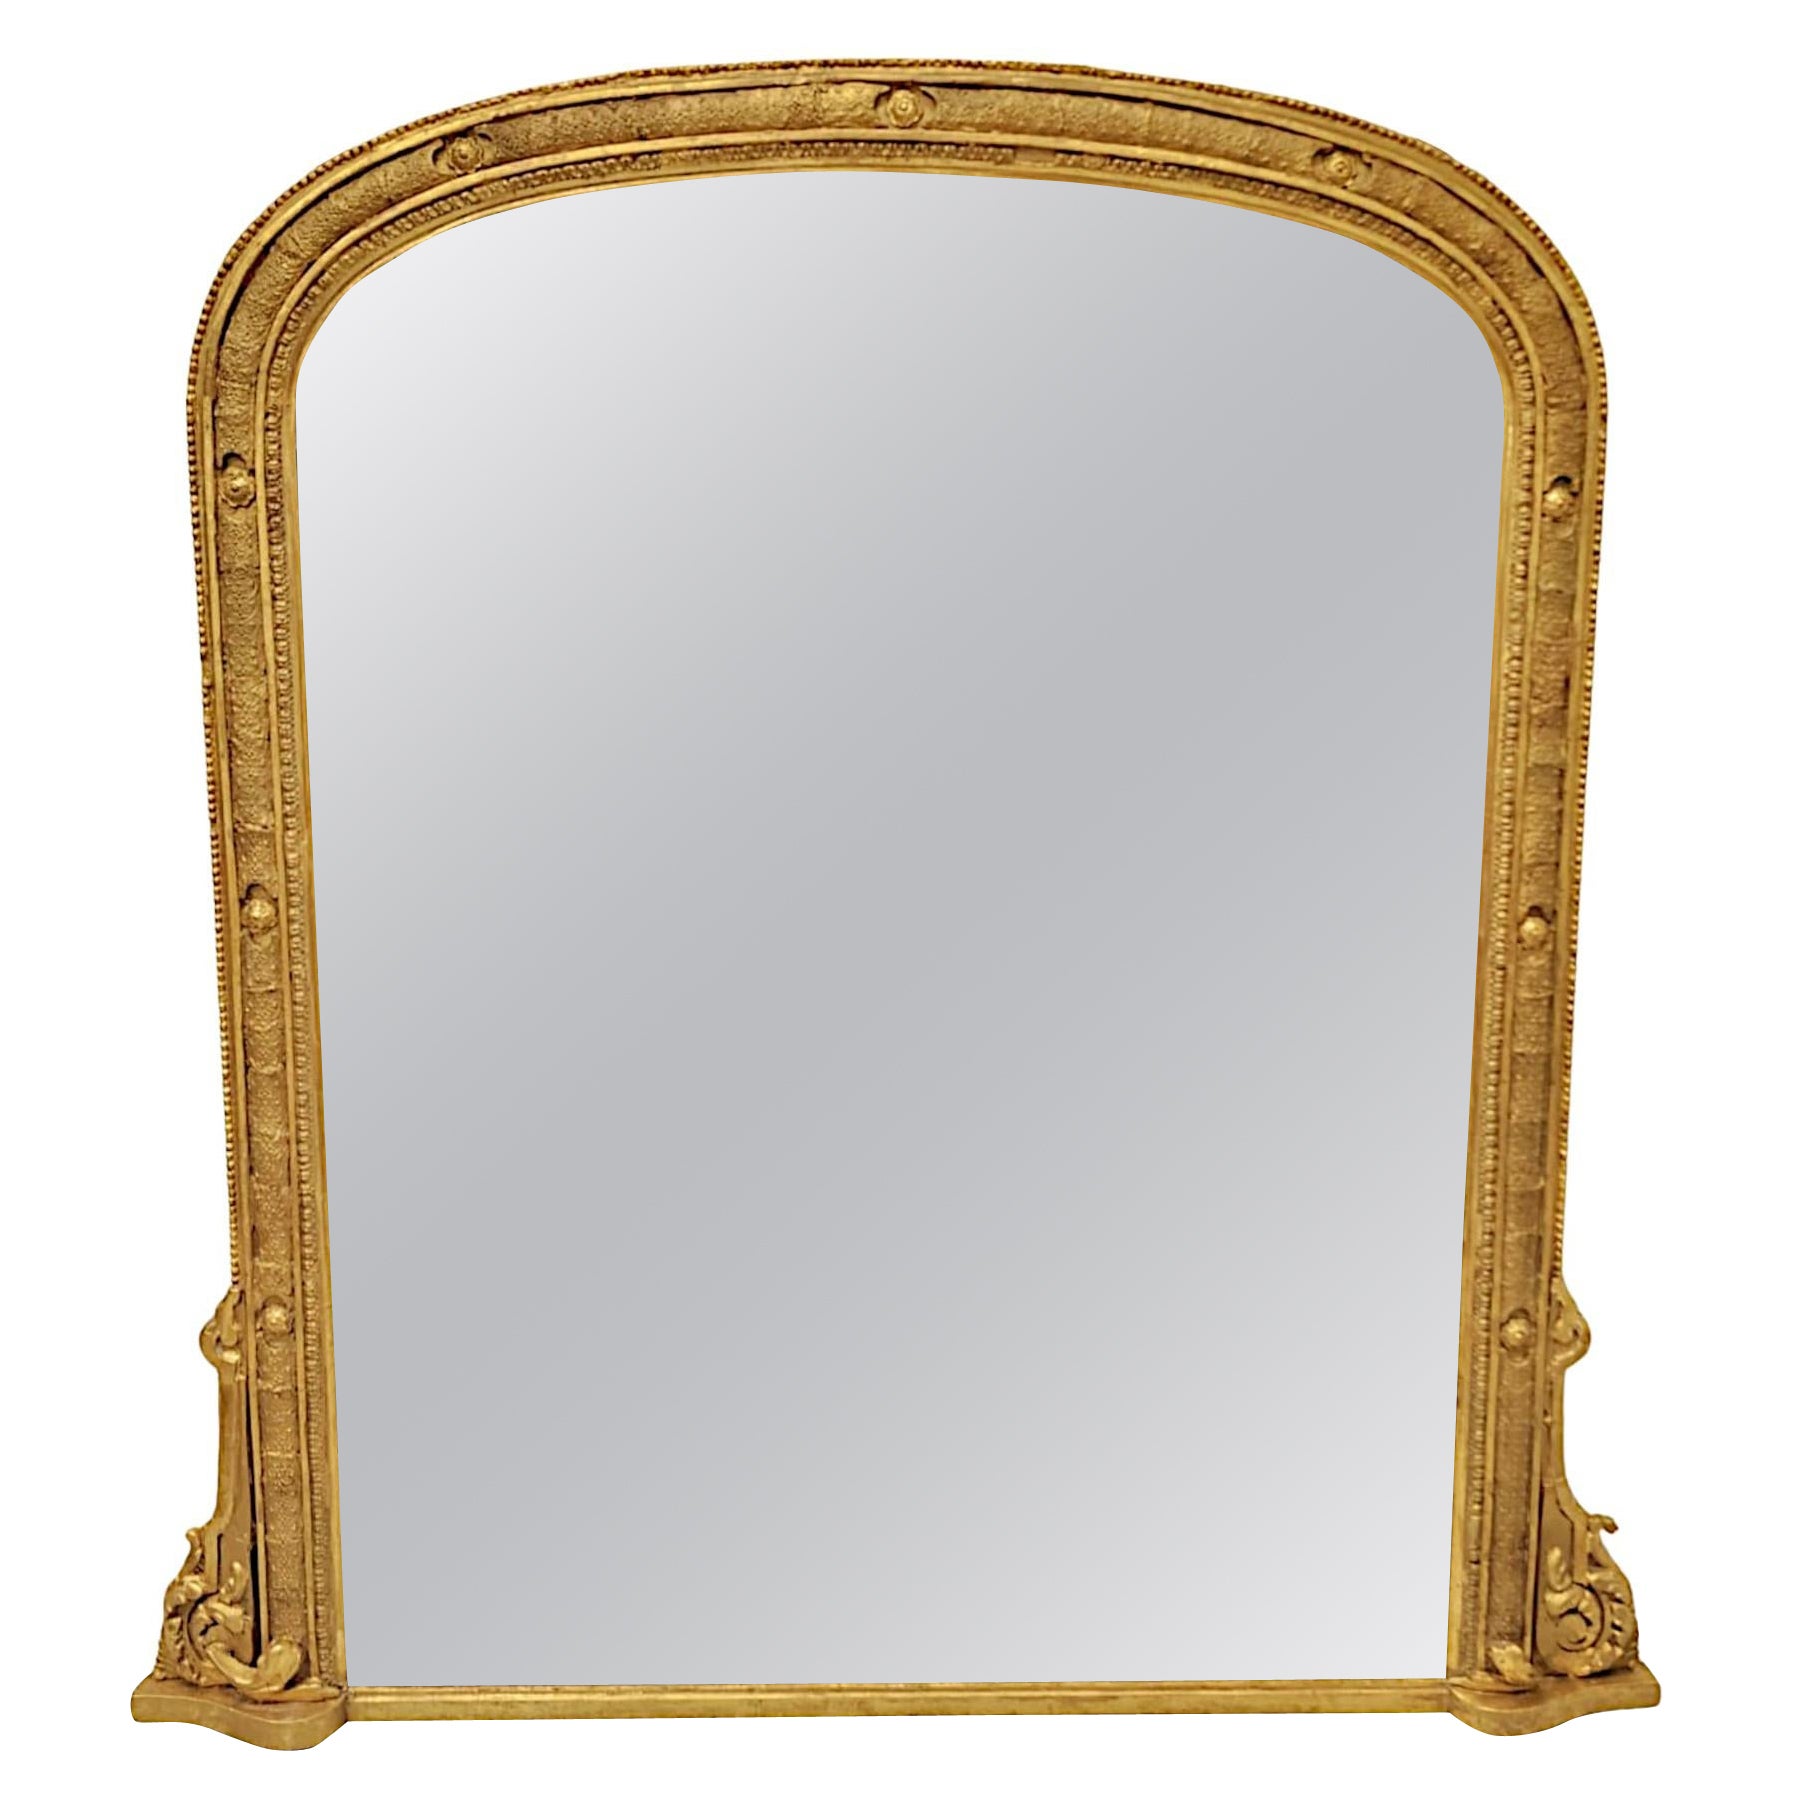 A Very Fine 19th Century Giltwood Overmantel Mirror For Sale